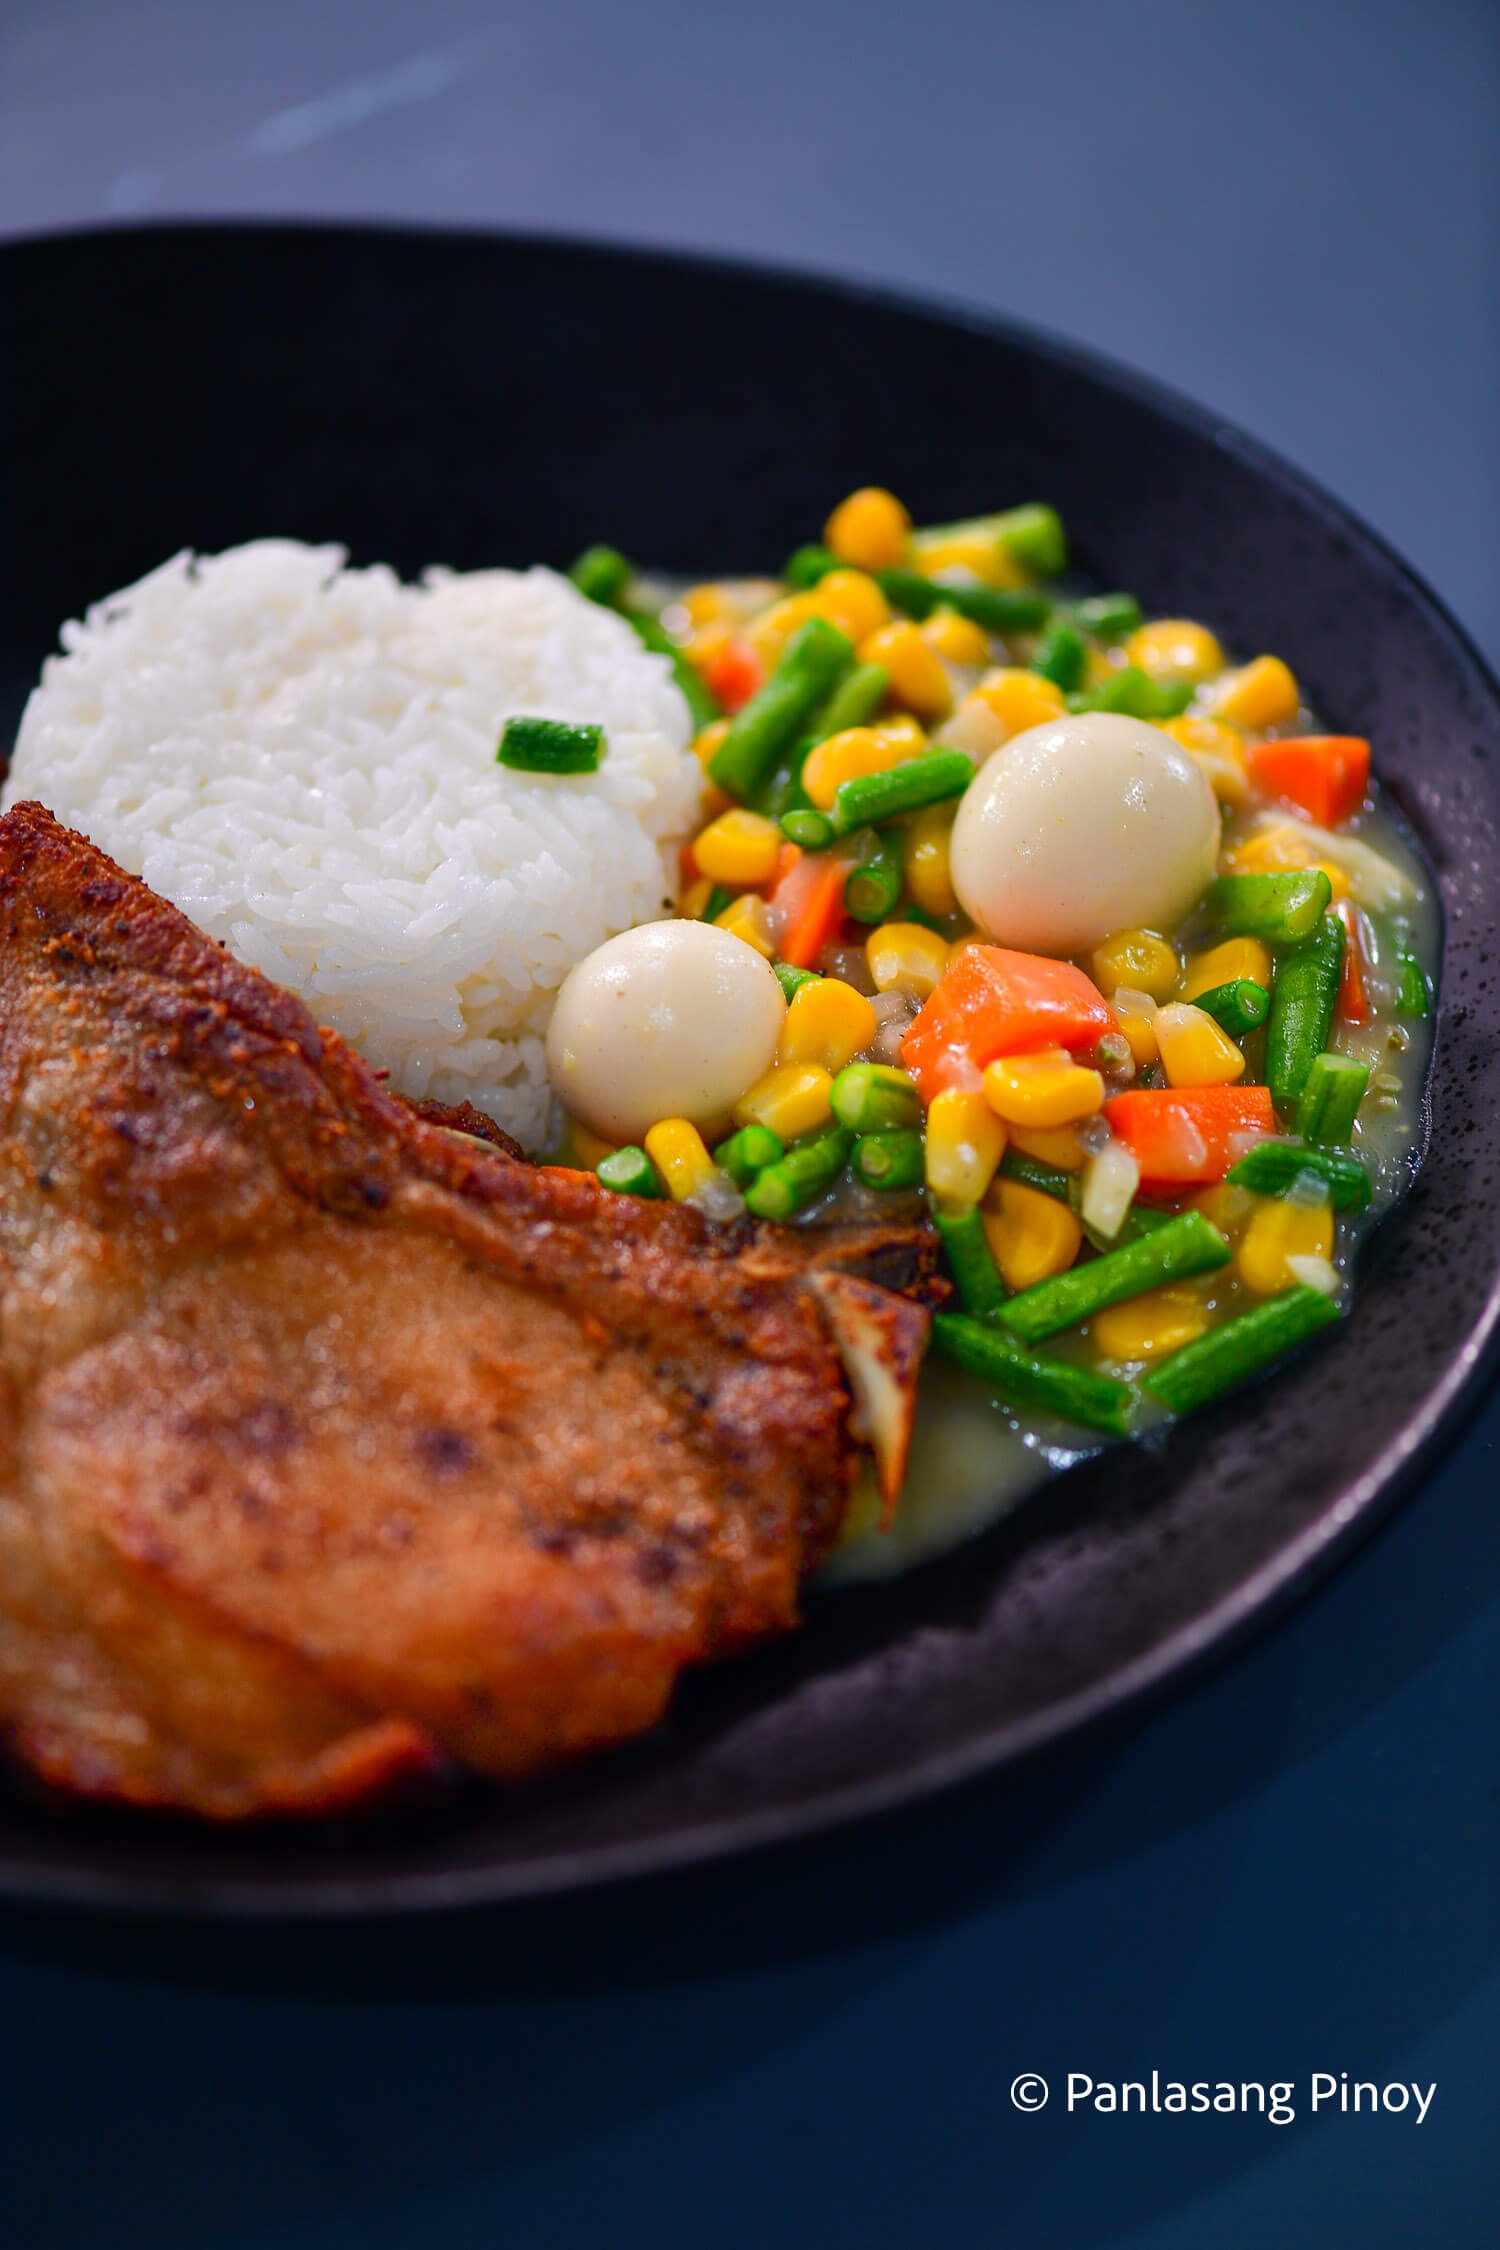 fried pork chop with rice and vegetables